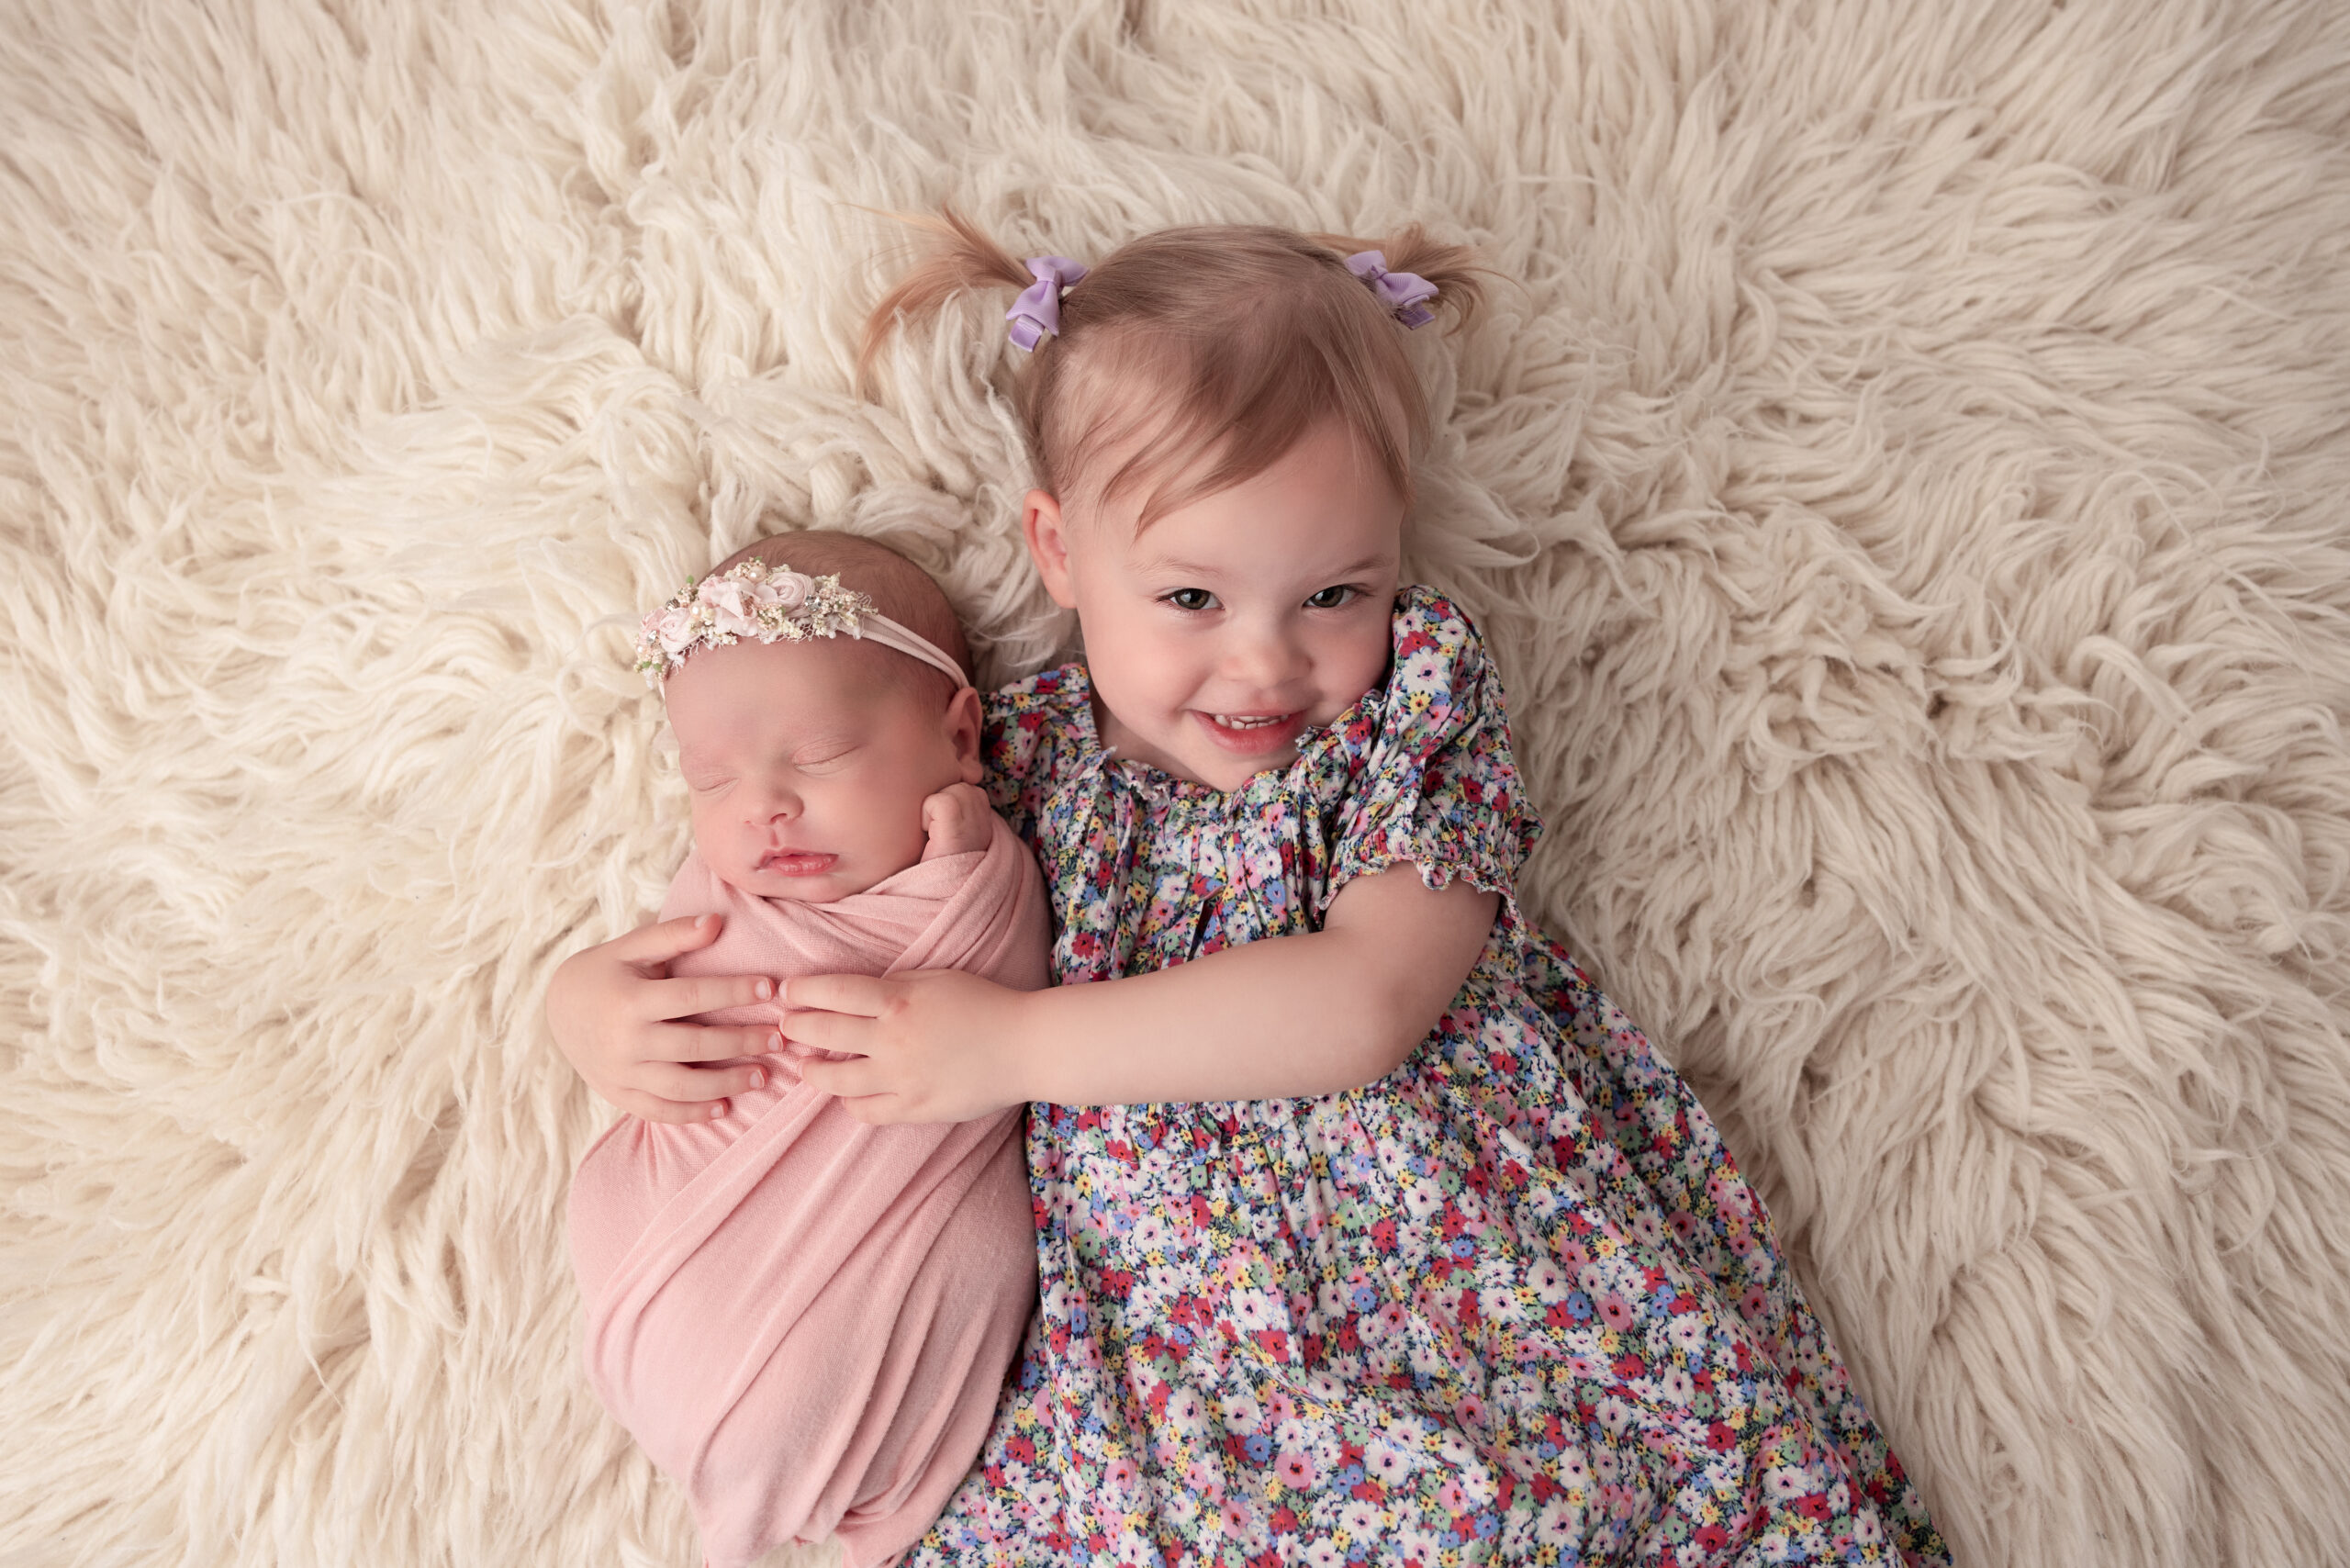 Older sibling in pig tails laying on a rug with her arms around her new baby sister wrapped in pink